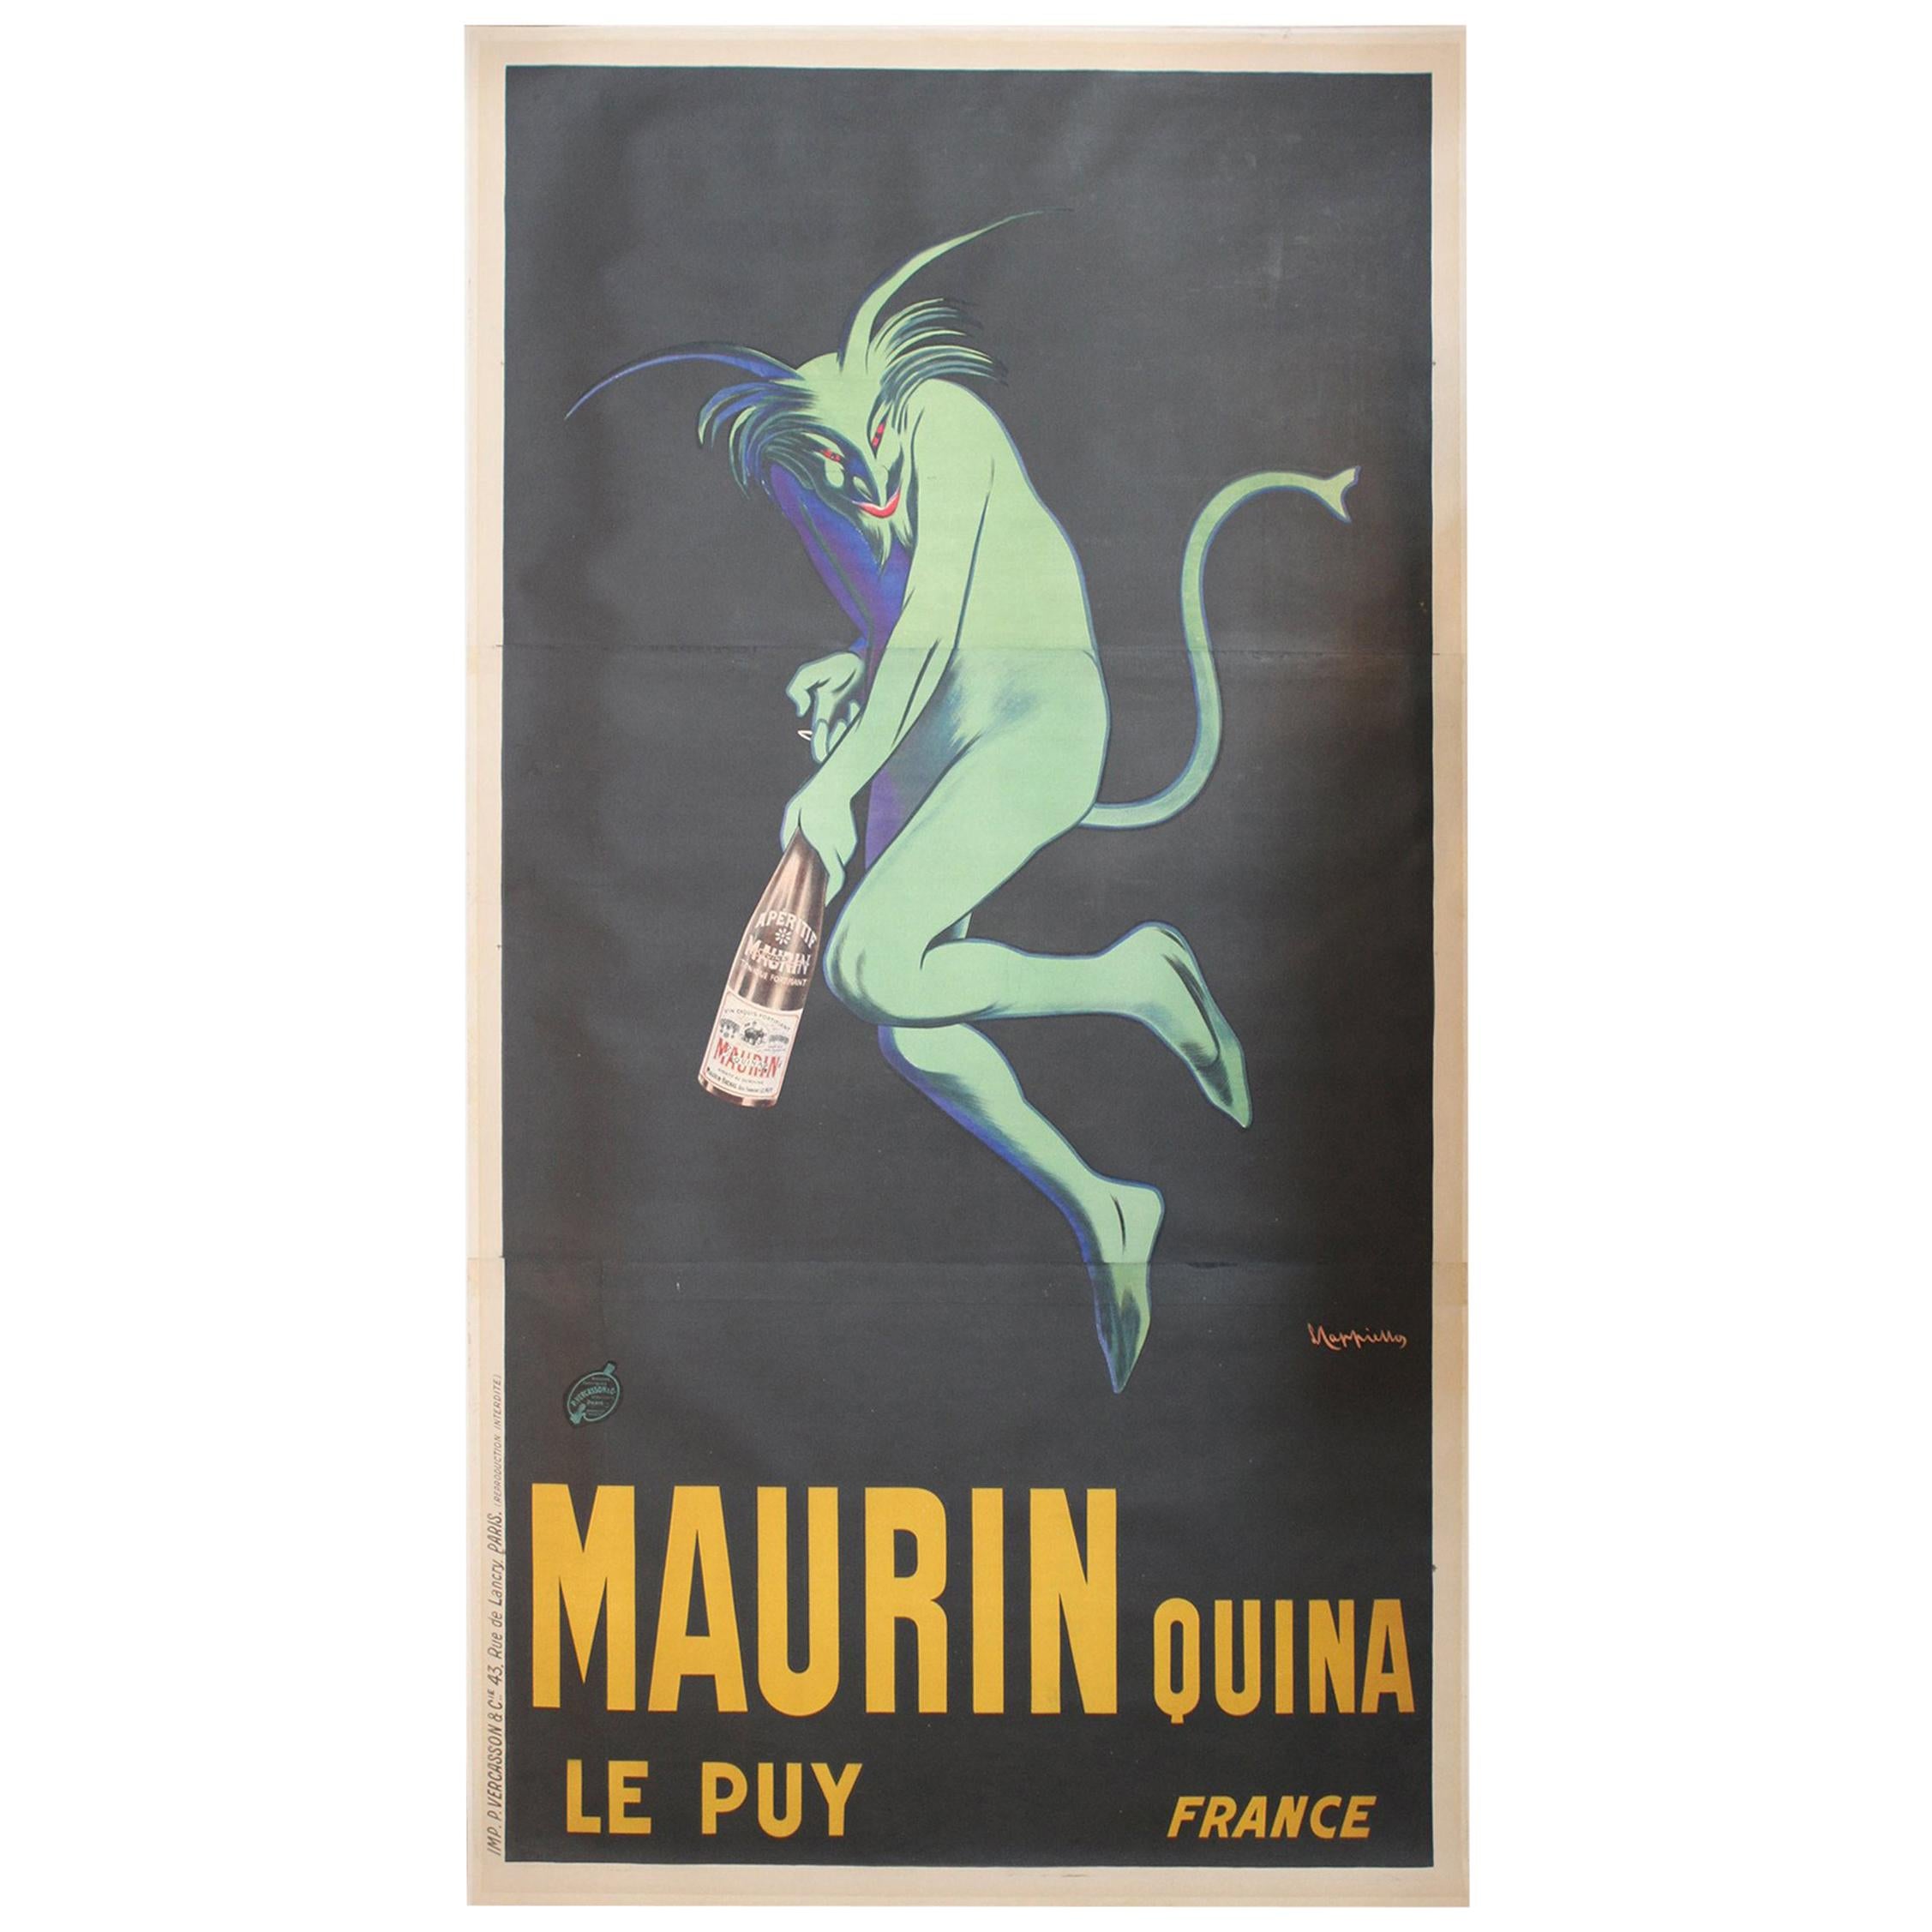 Monumental Original French Poster Maurin Quina Ley Puy, Great for Winery/ Bar